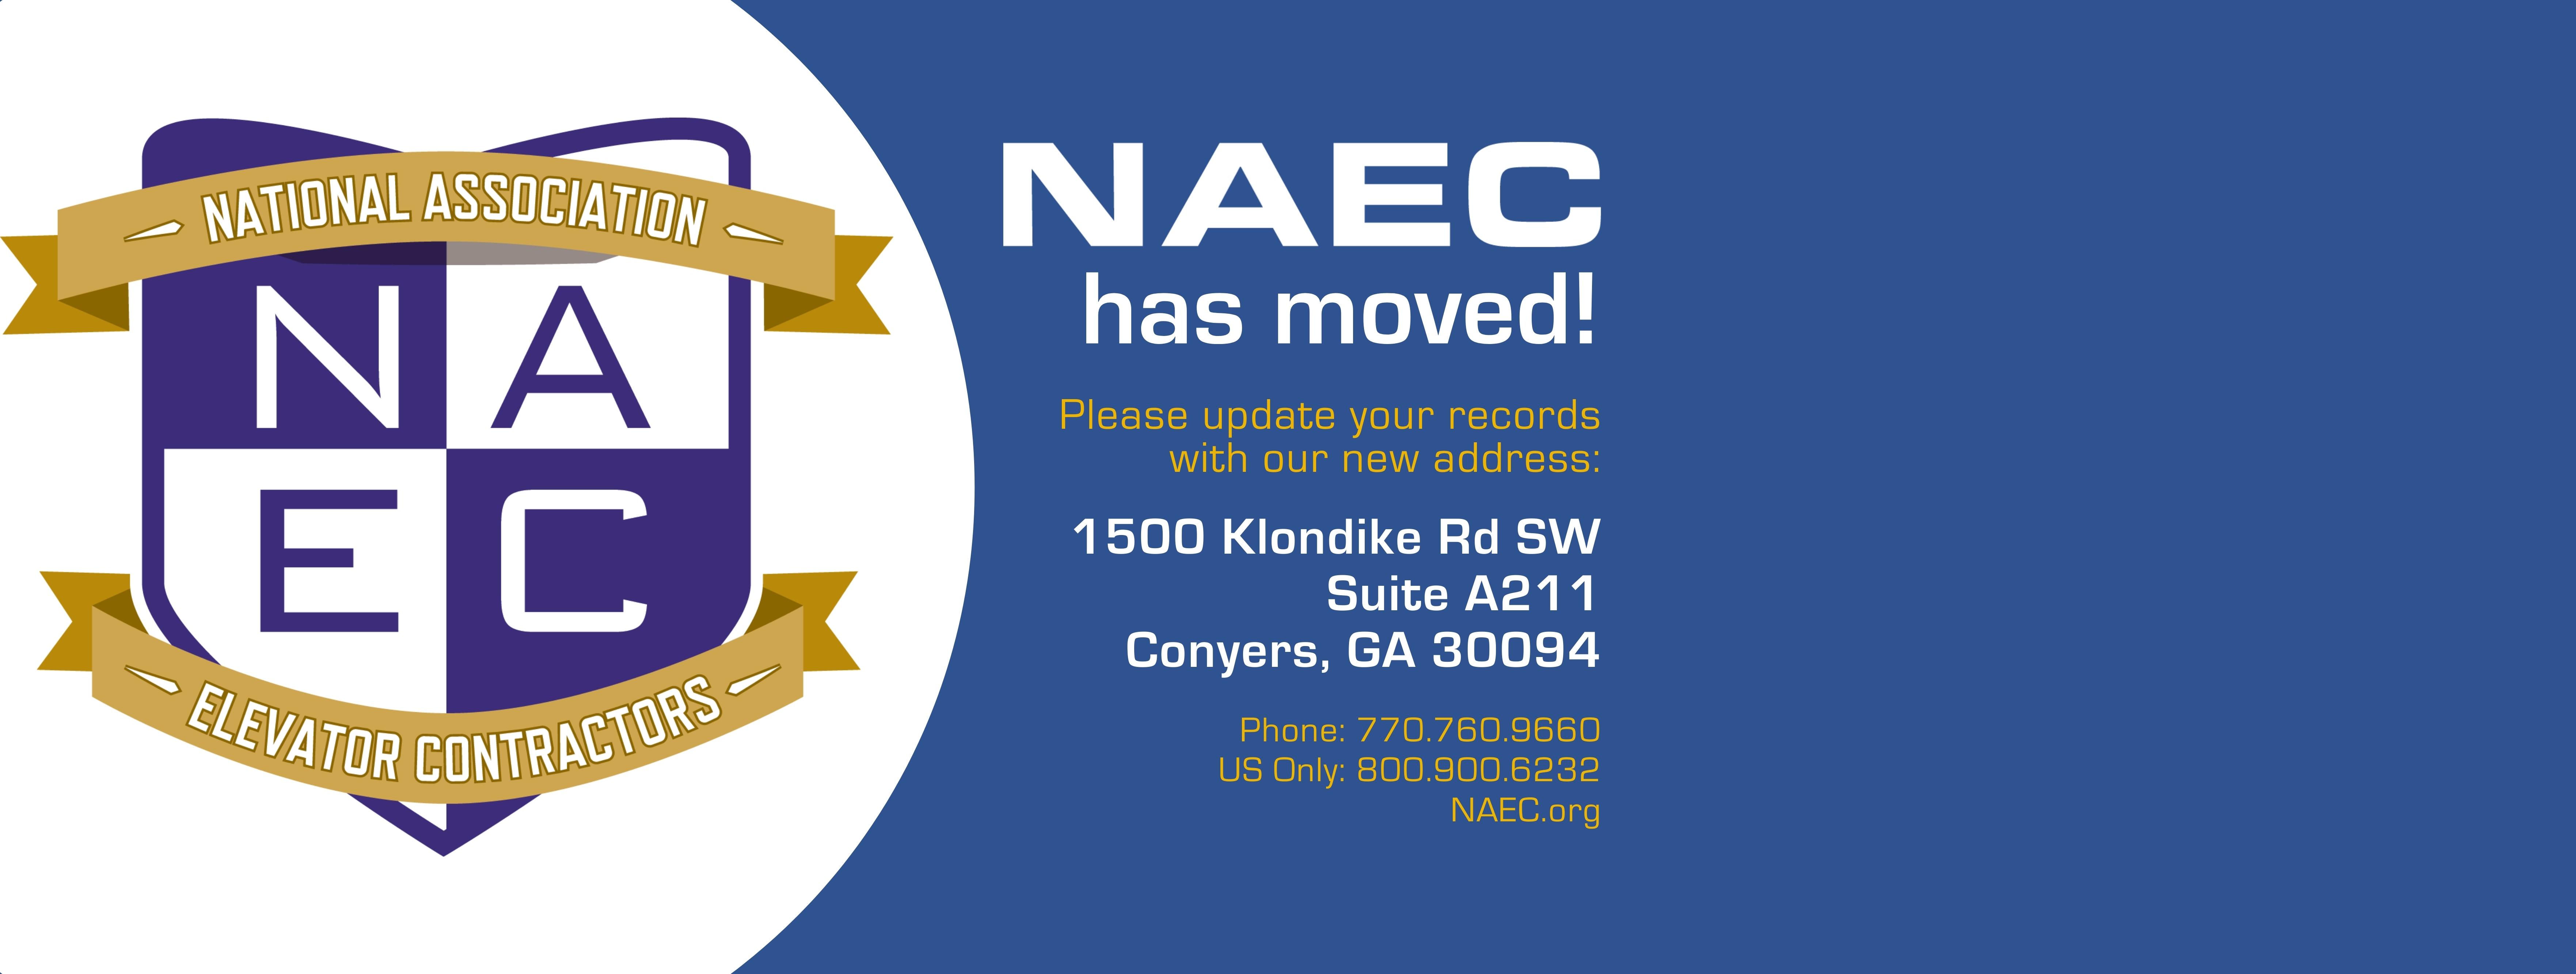 NAEC has moved